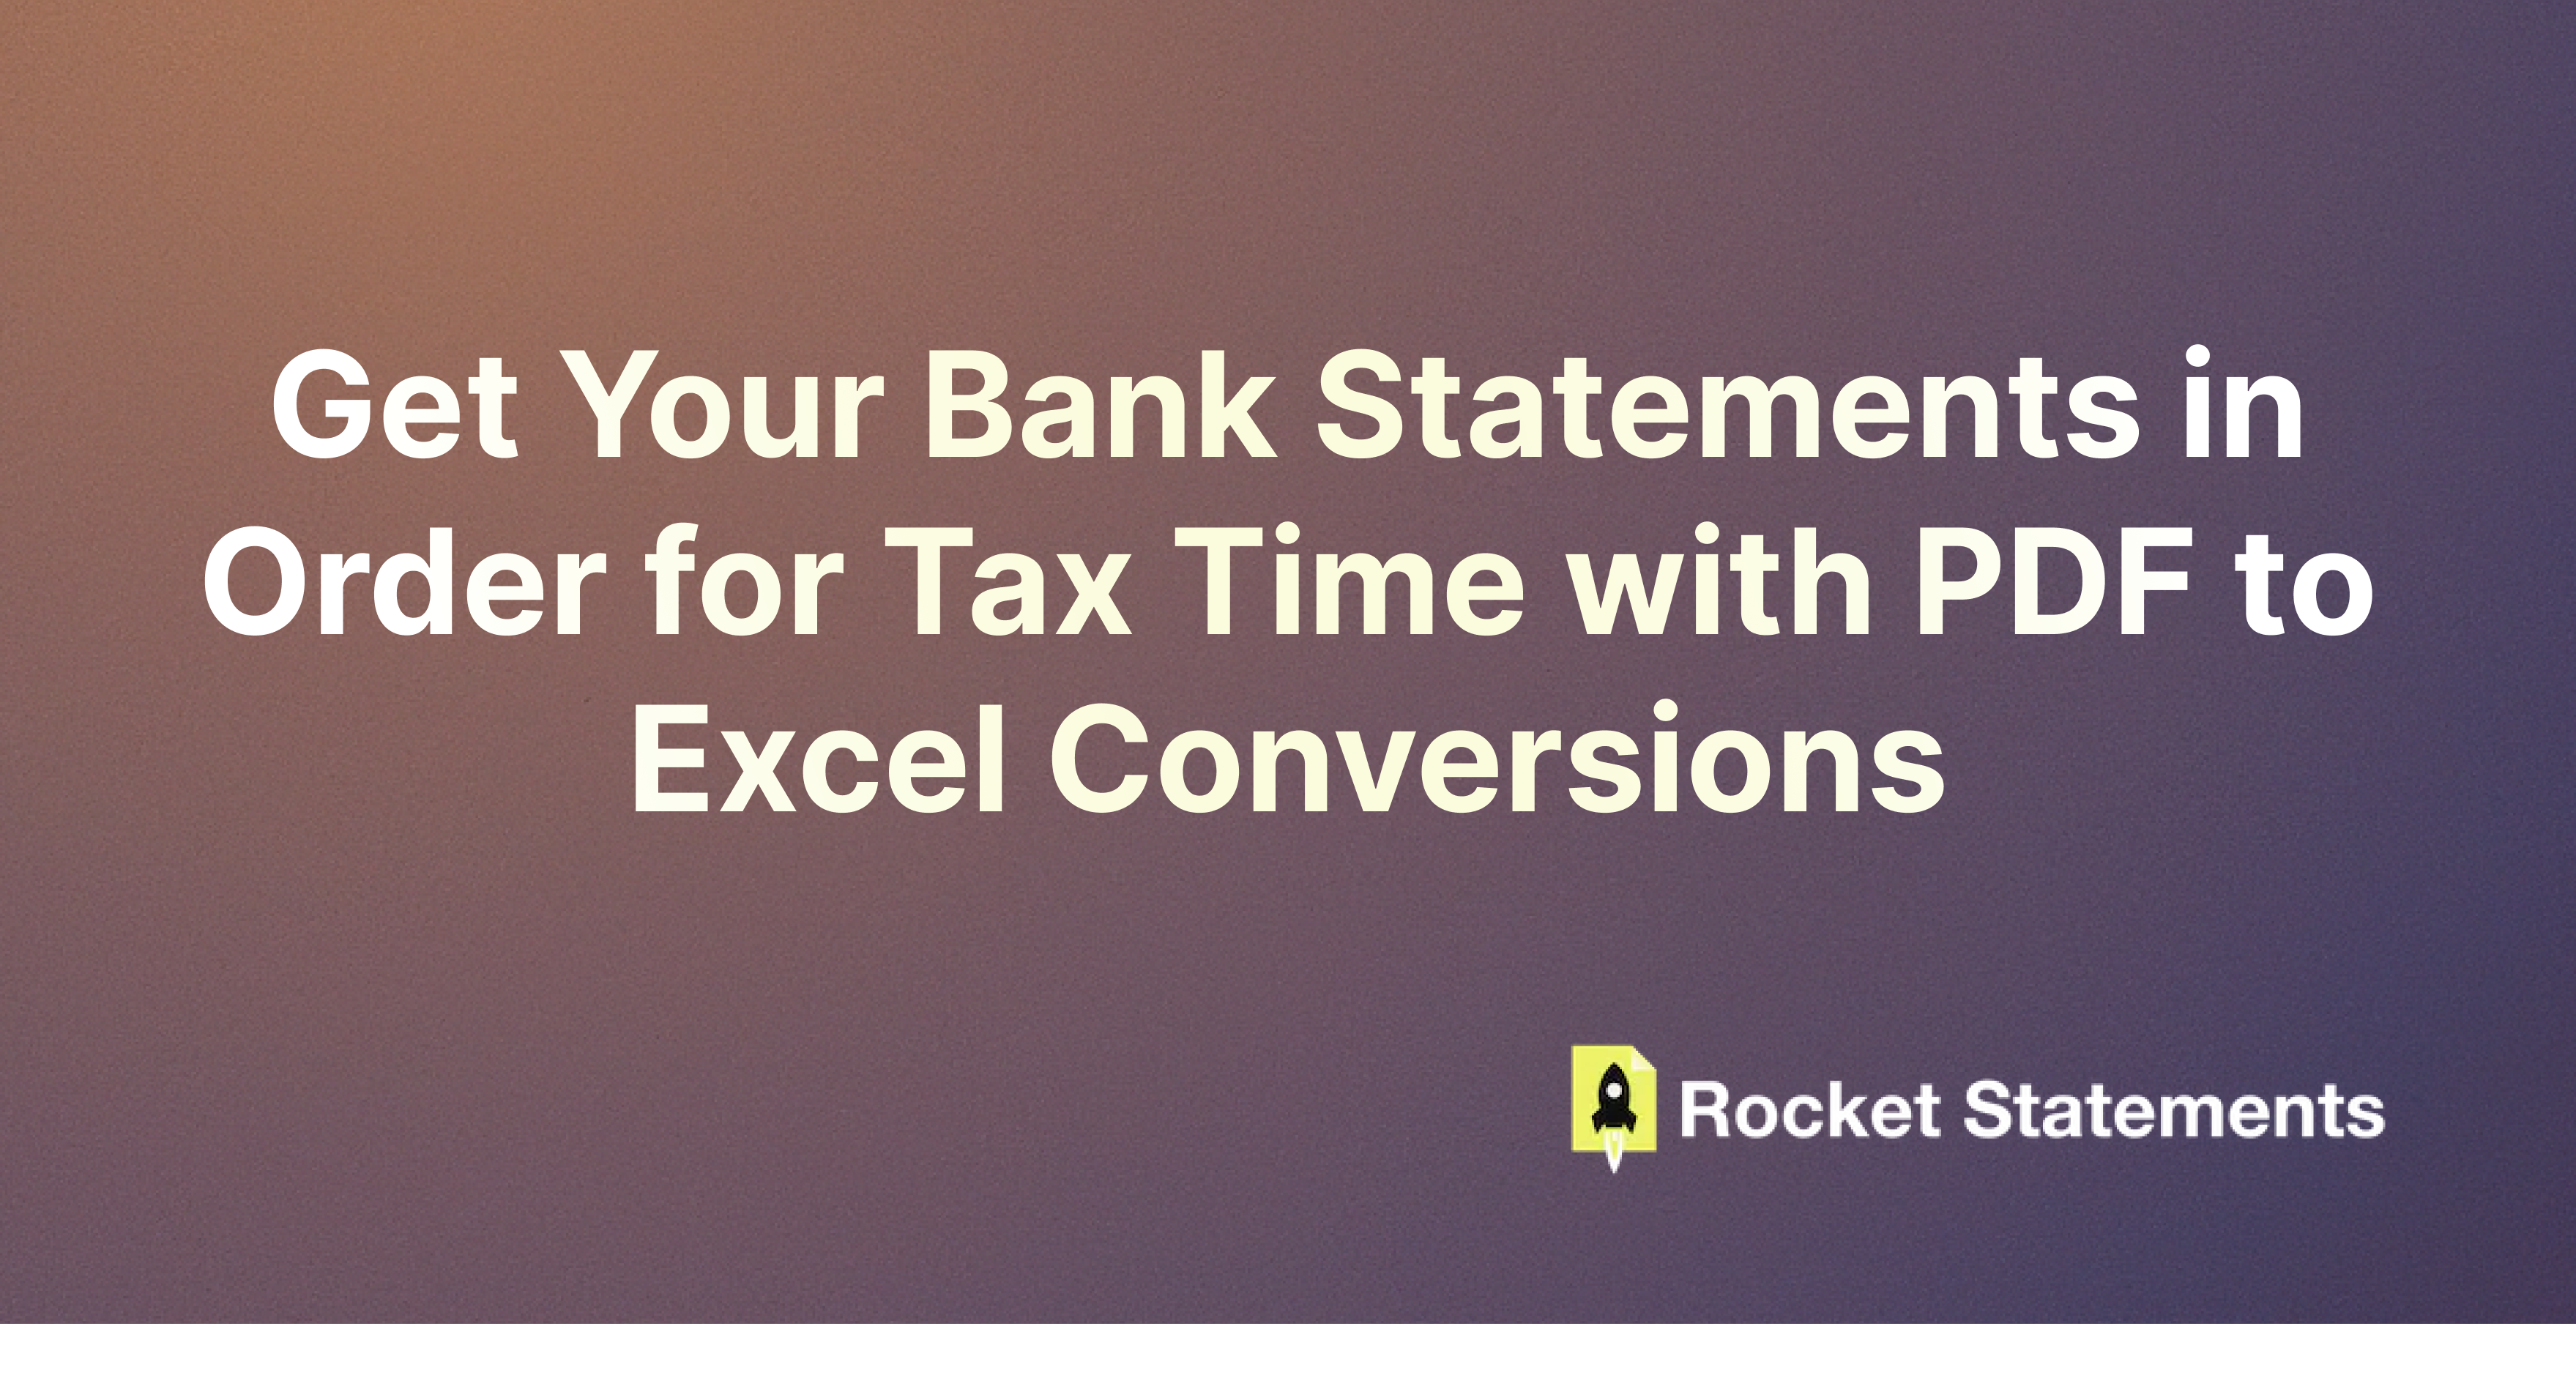 Get Your Bank Statements in Order for Tax Time with PDF to Excel Conversions